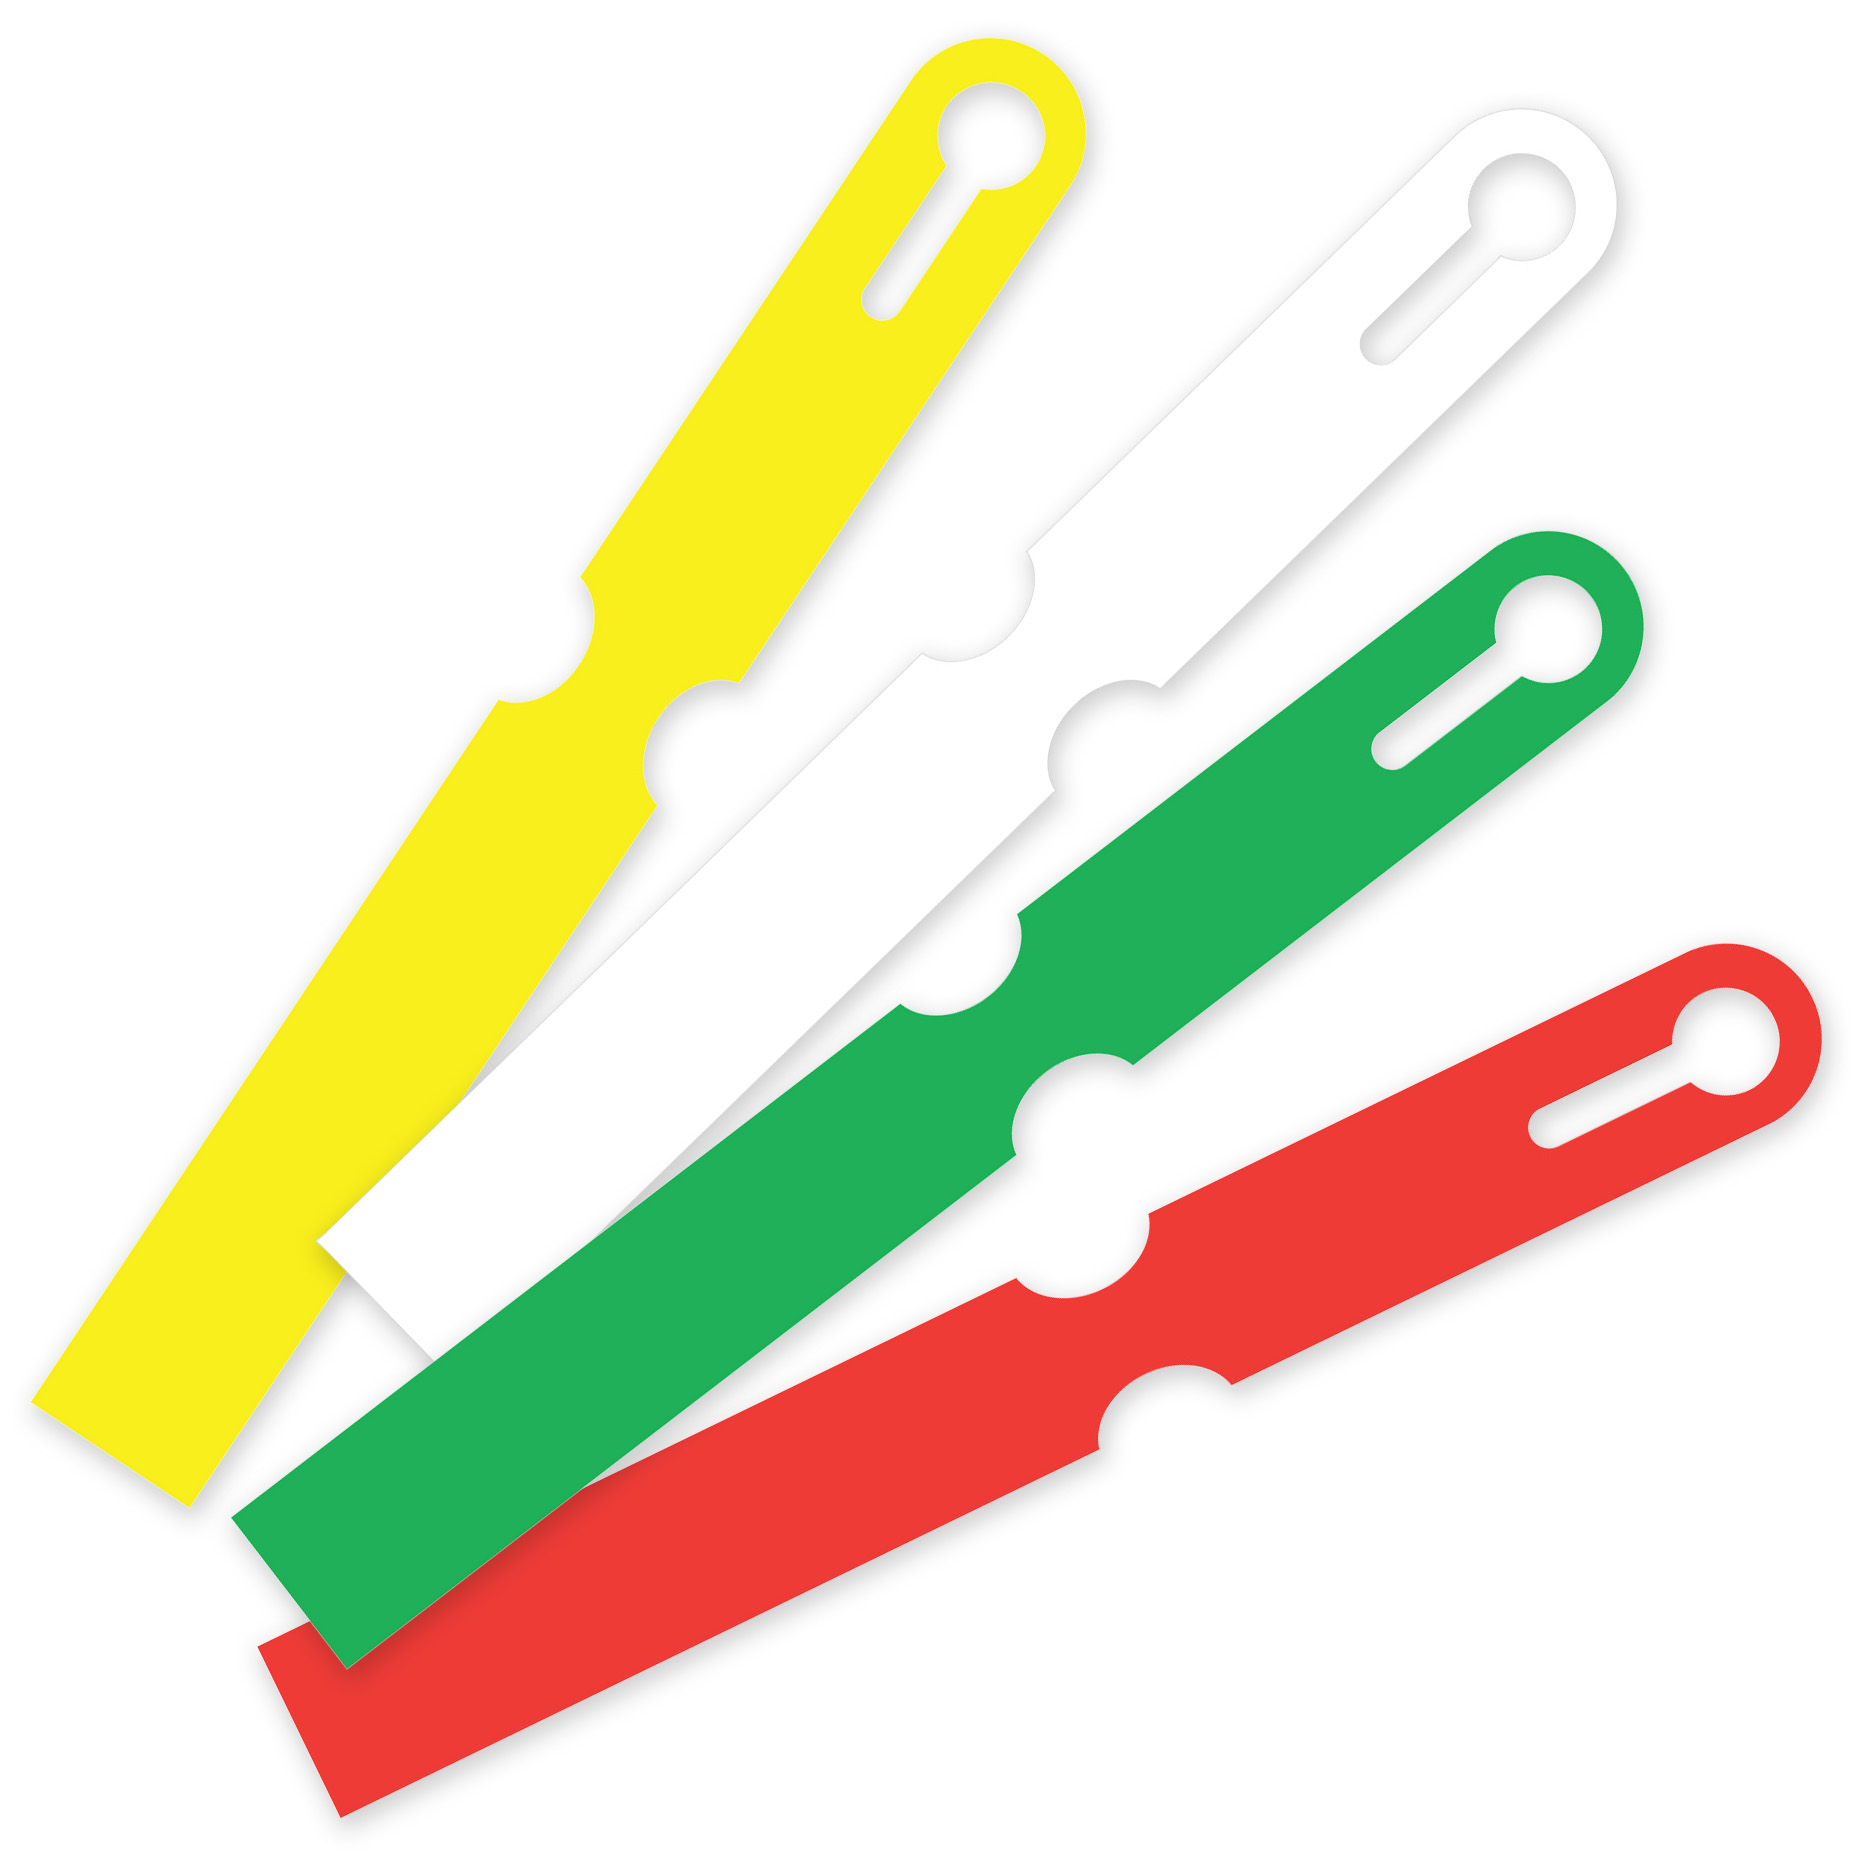 Label 286x32 mm in green, yellow, red and white